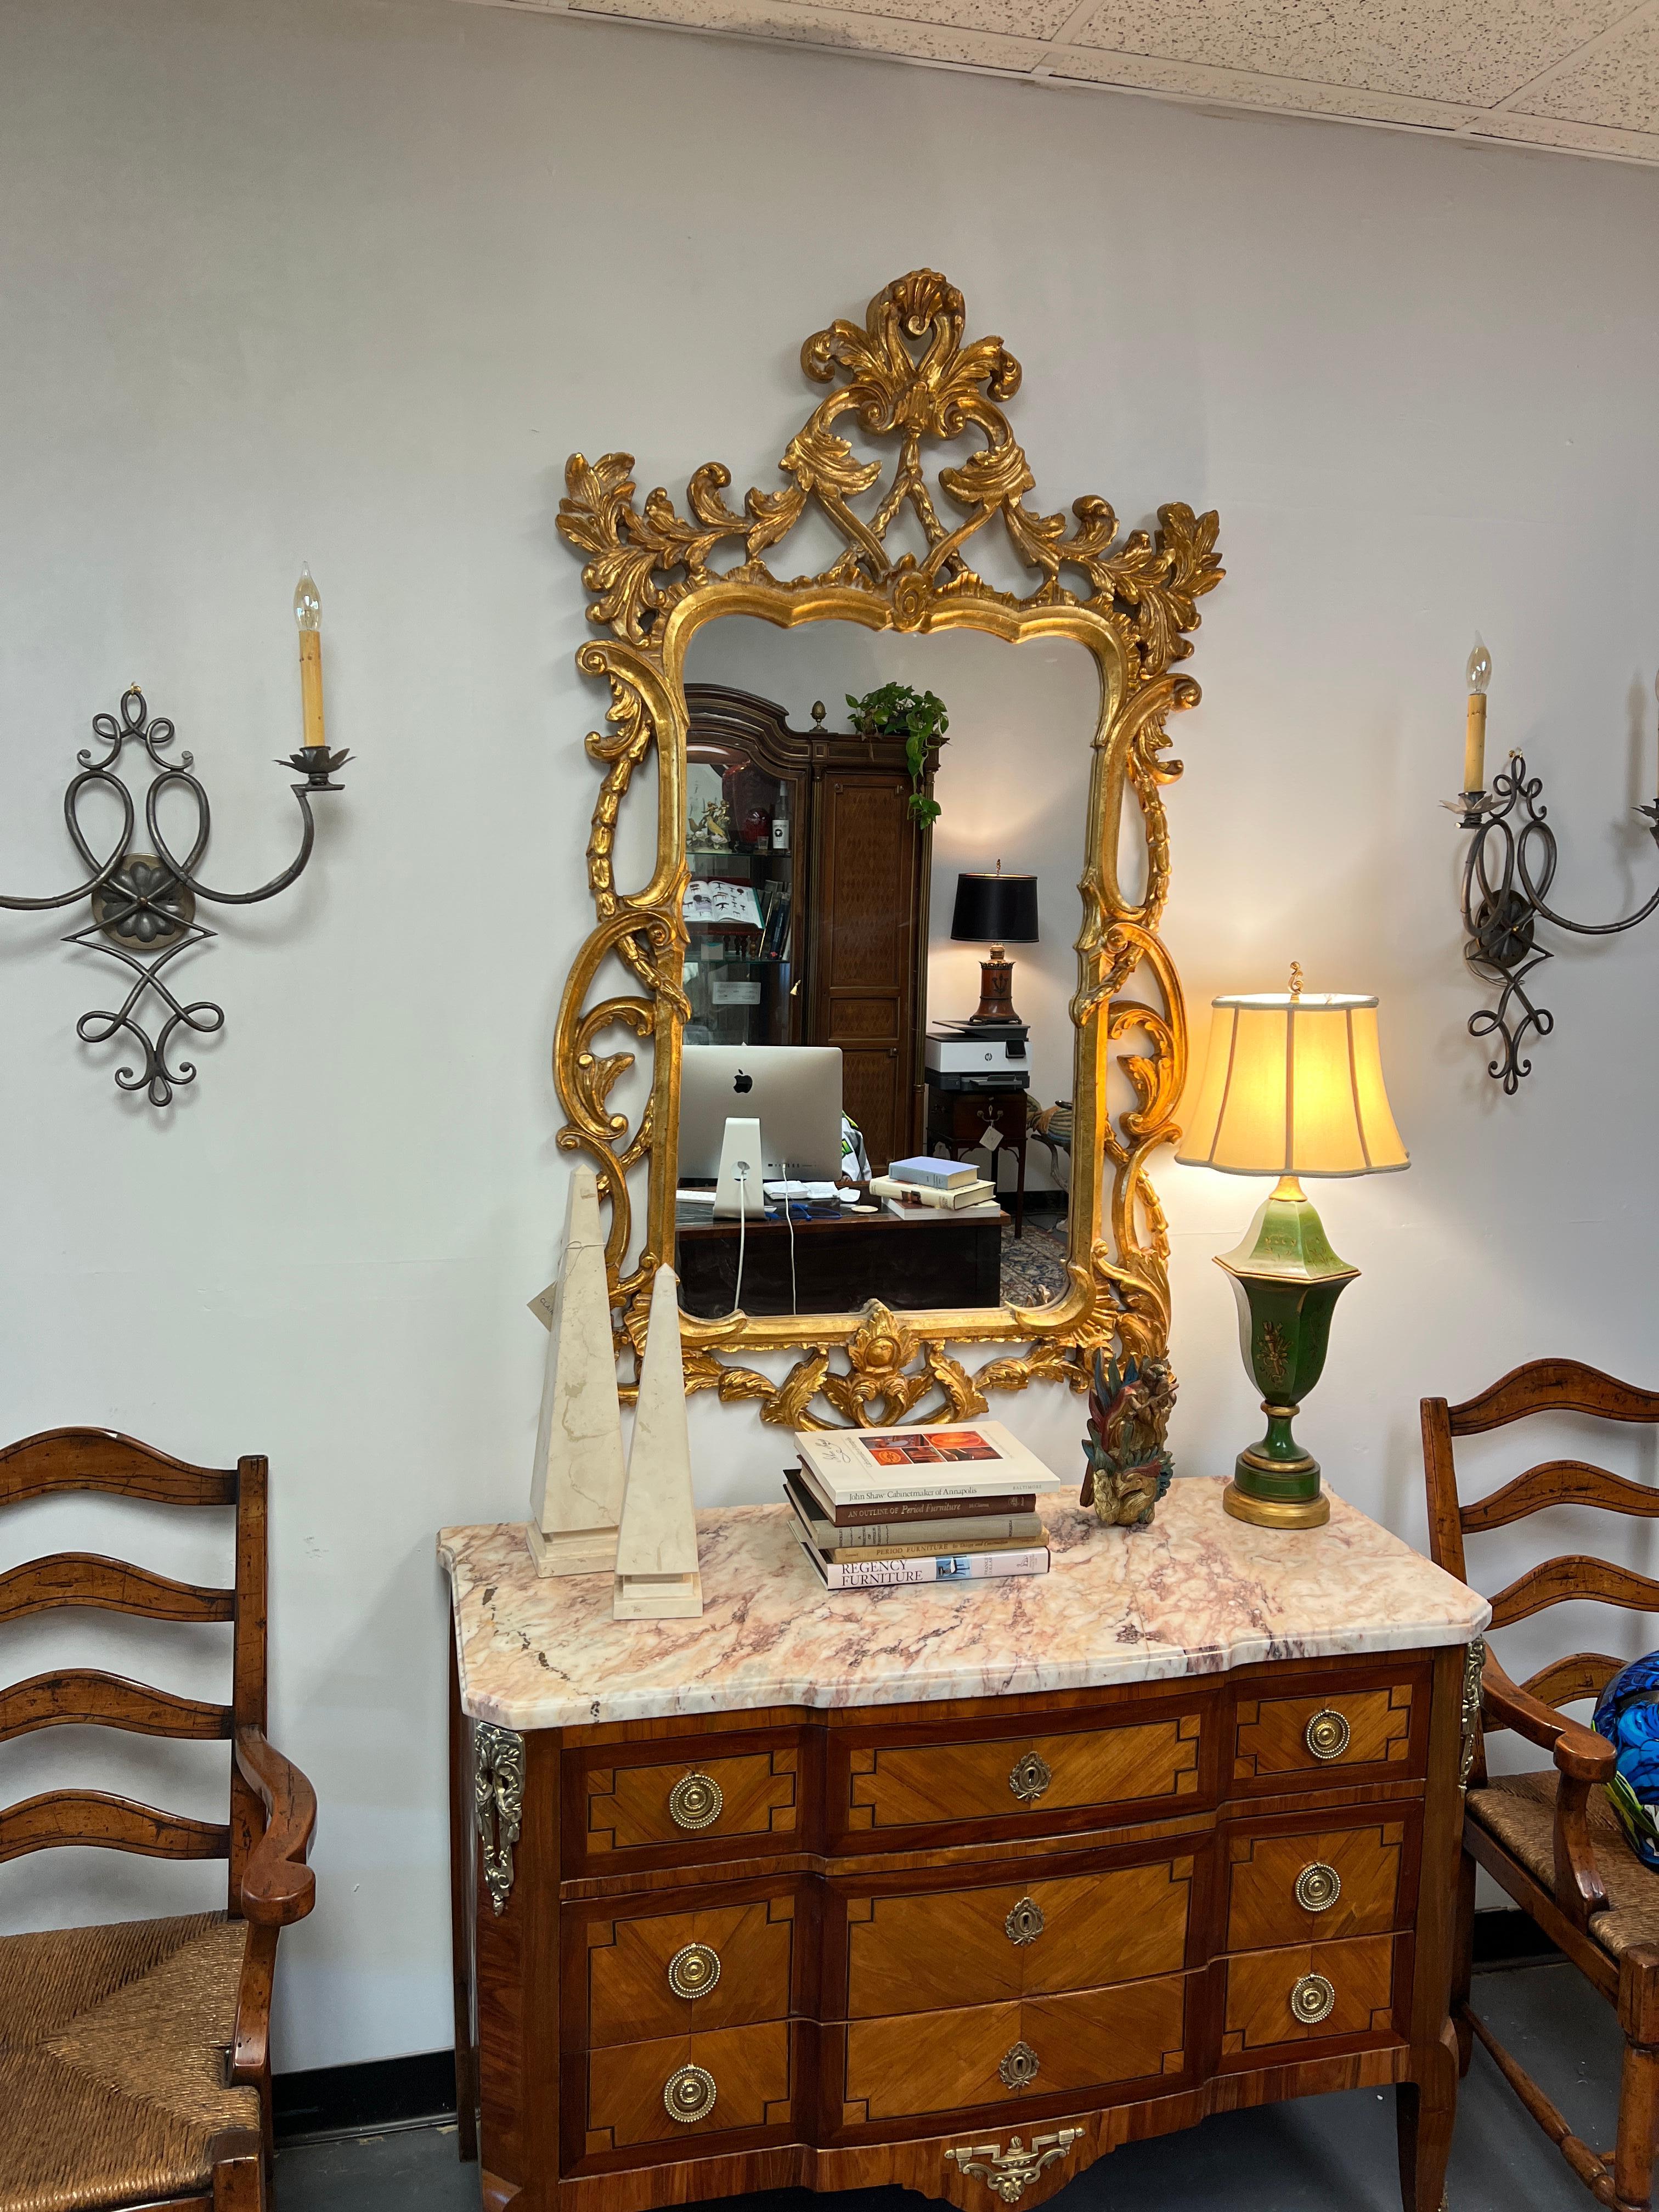 Here is featured a large Italian hand carved gilt wood mirror or looking glass in the Rococo style. This mirror was manufactured circa 1950-1960. The frame is made from fruit wood and completely hand carved. The carvings are crisp and distinct. The